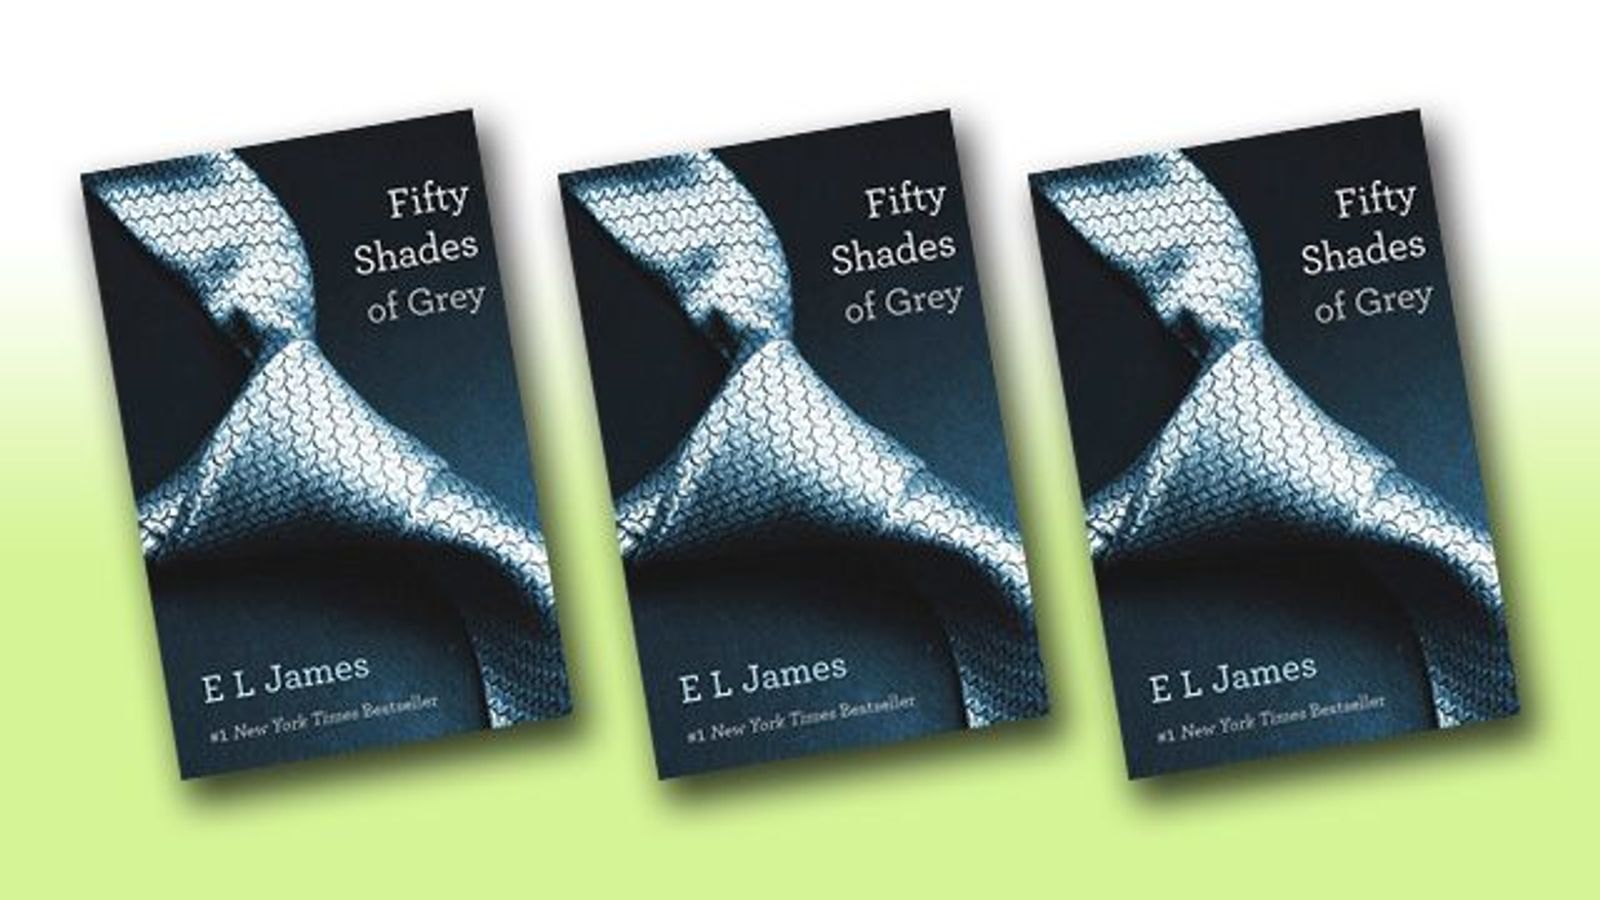 Stockroom Sees Sales Surge Thanks to ‘Fifty Shades’